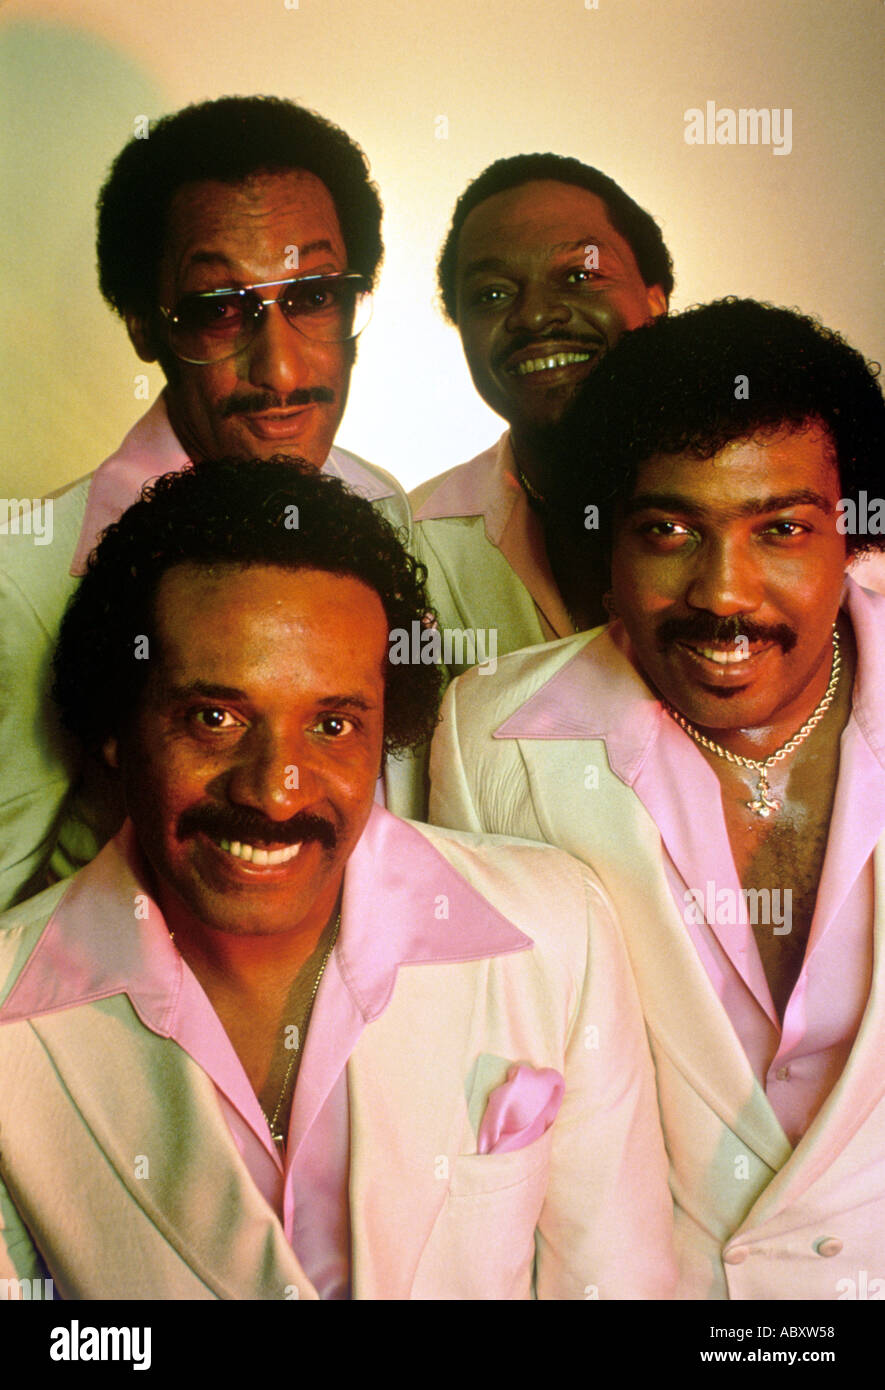 FOUR TOPS American music group in the 1970s Stock Photo